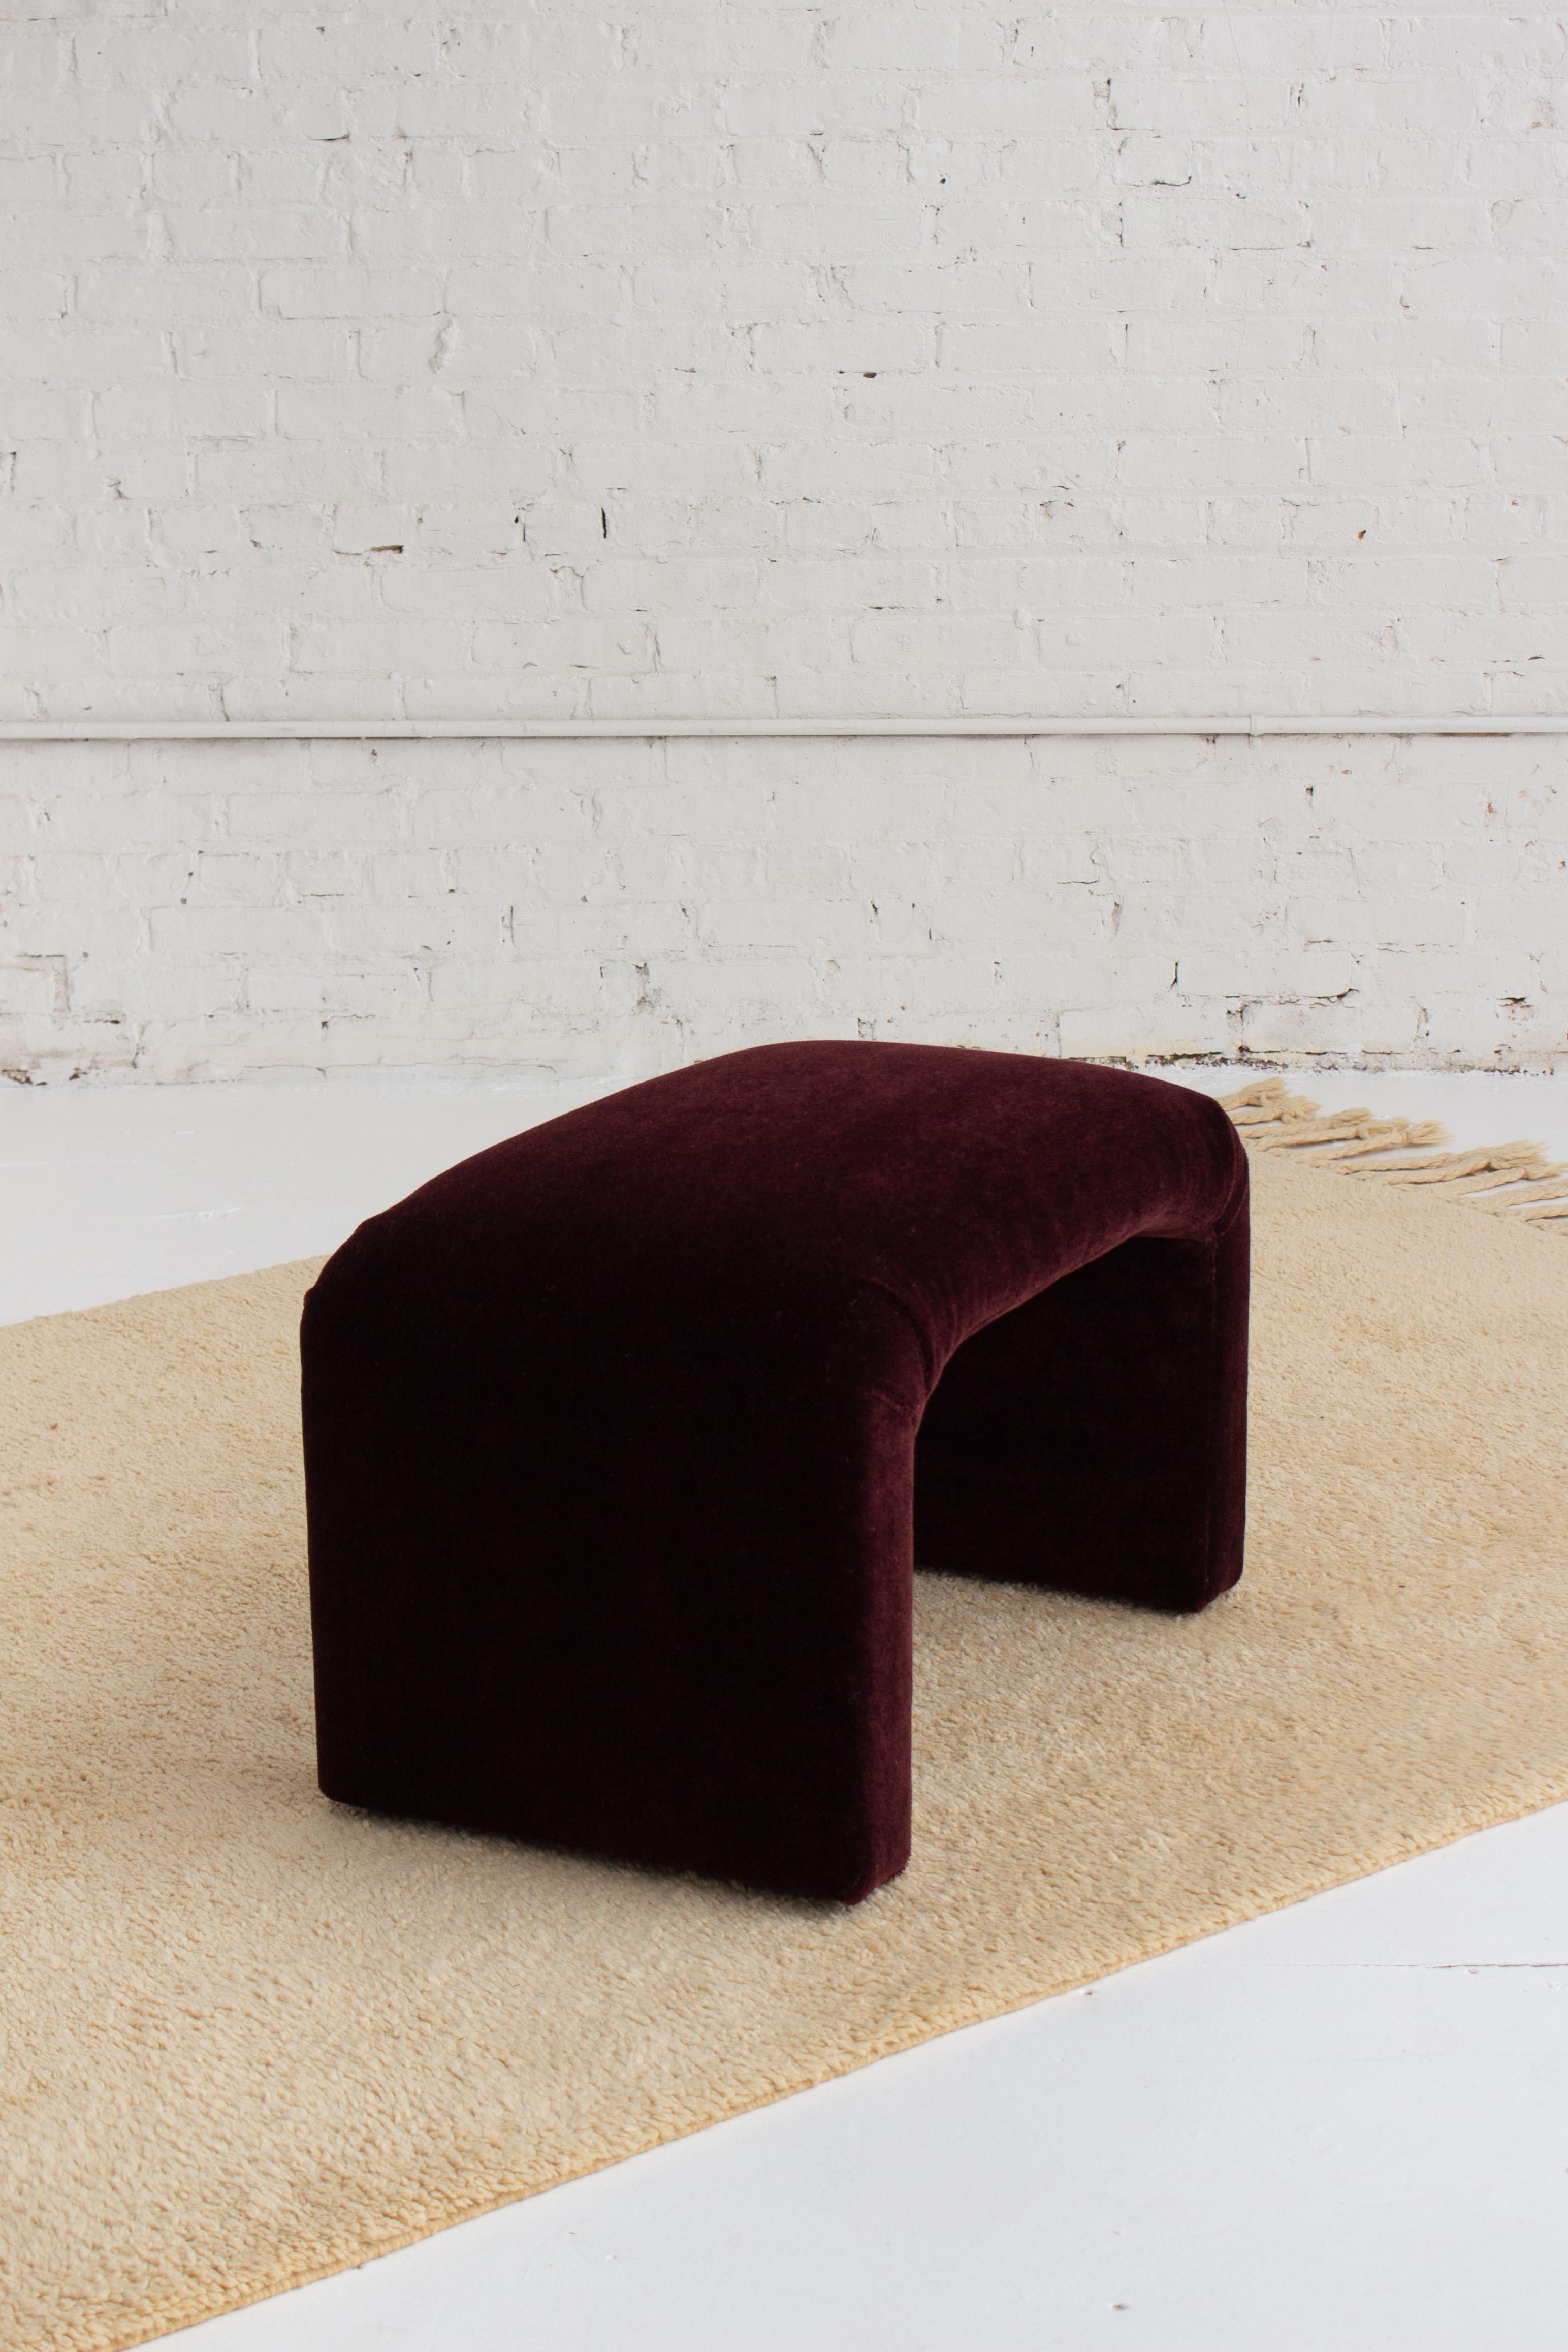 A mid century waterfall bench newly reupholstered in a plush high pile crimson mohair.